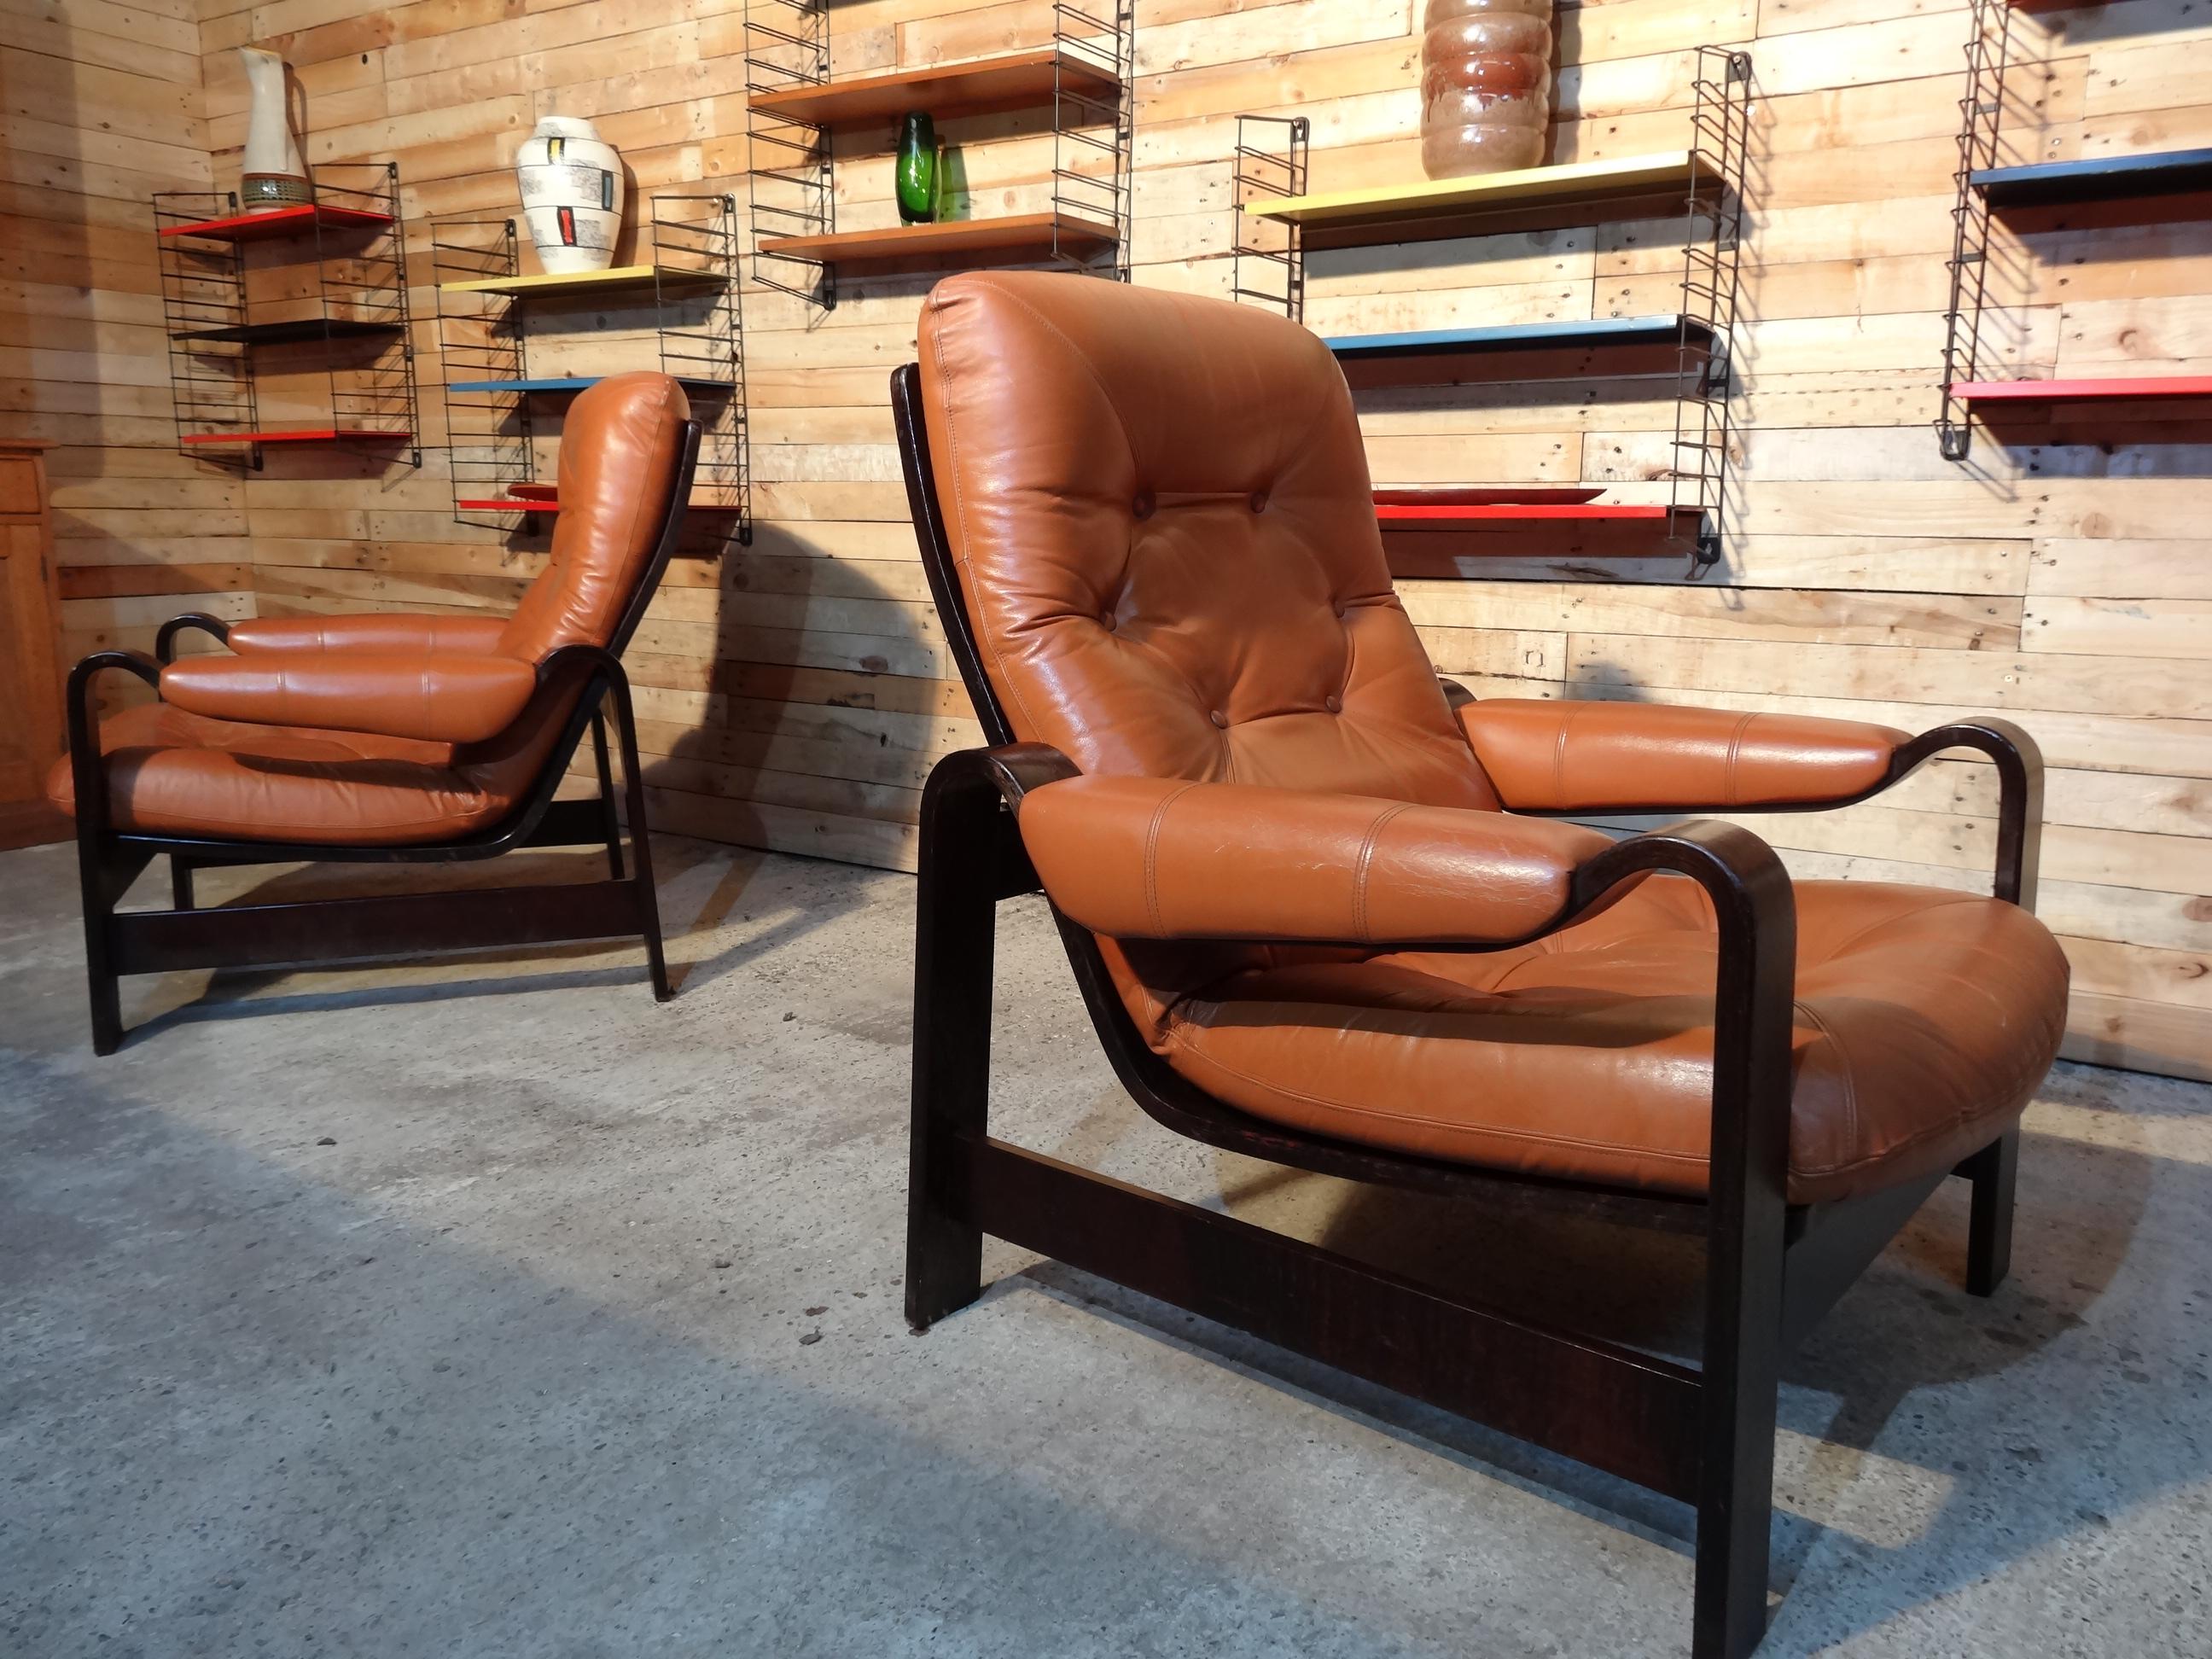 1970's vintage Retro Dutch Coja leather bentwood arm chair or club chair

1970's Coja arm chairs unusual bentwood designed, covered in a light brown leather, leather has a lovely patina.

Delivery price is per chair. 

Measures: Seat height: